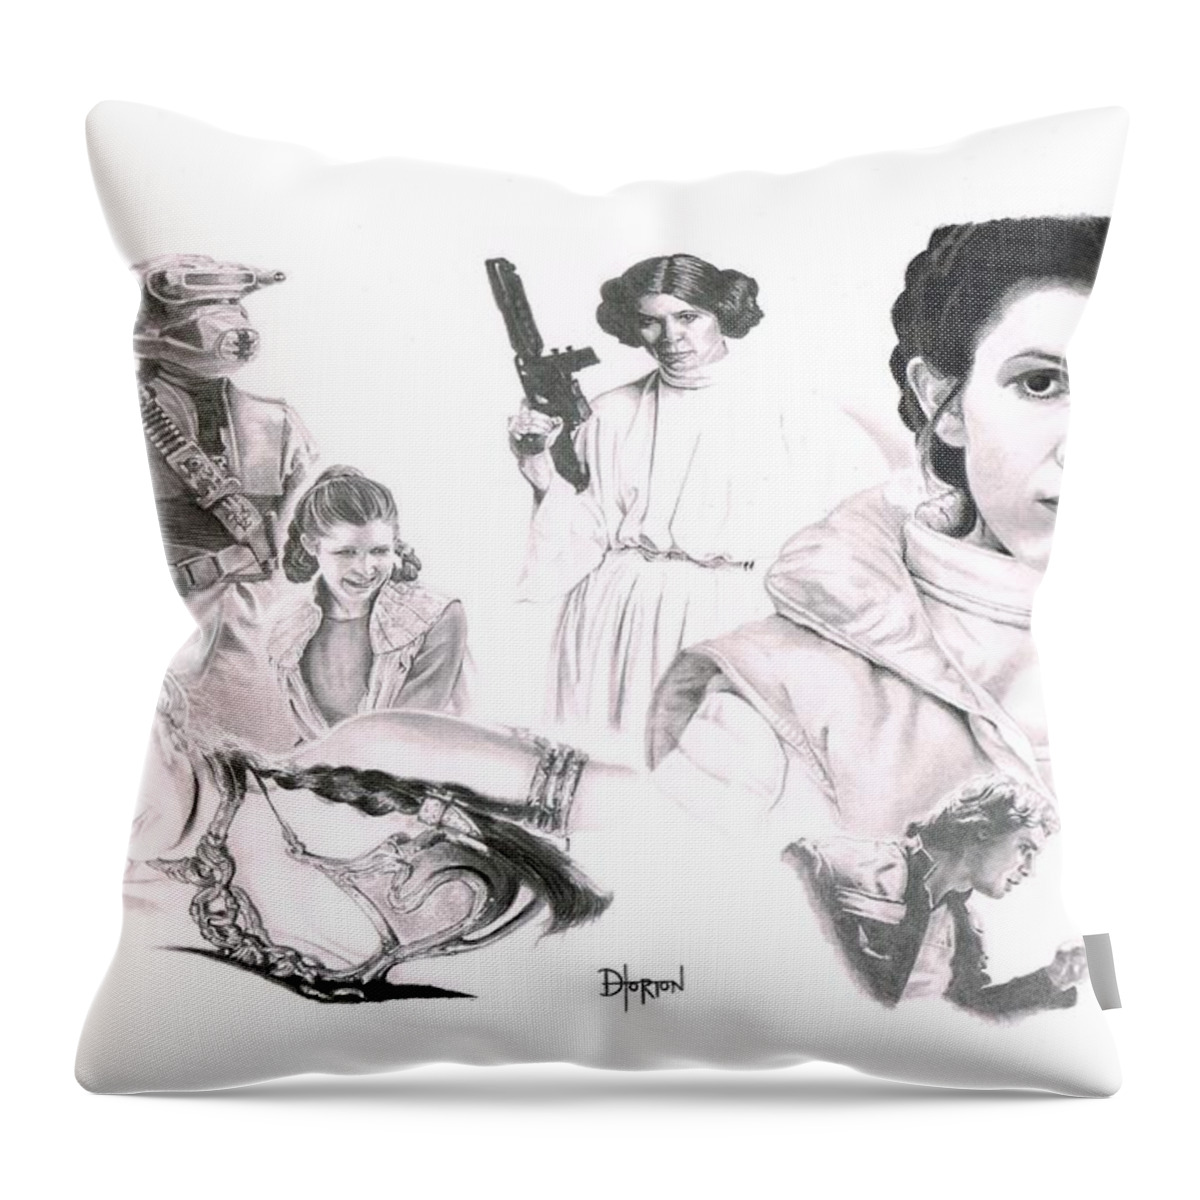 Leia Throw Pillow featuring the drawing Leia by David Horton